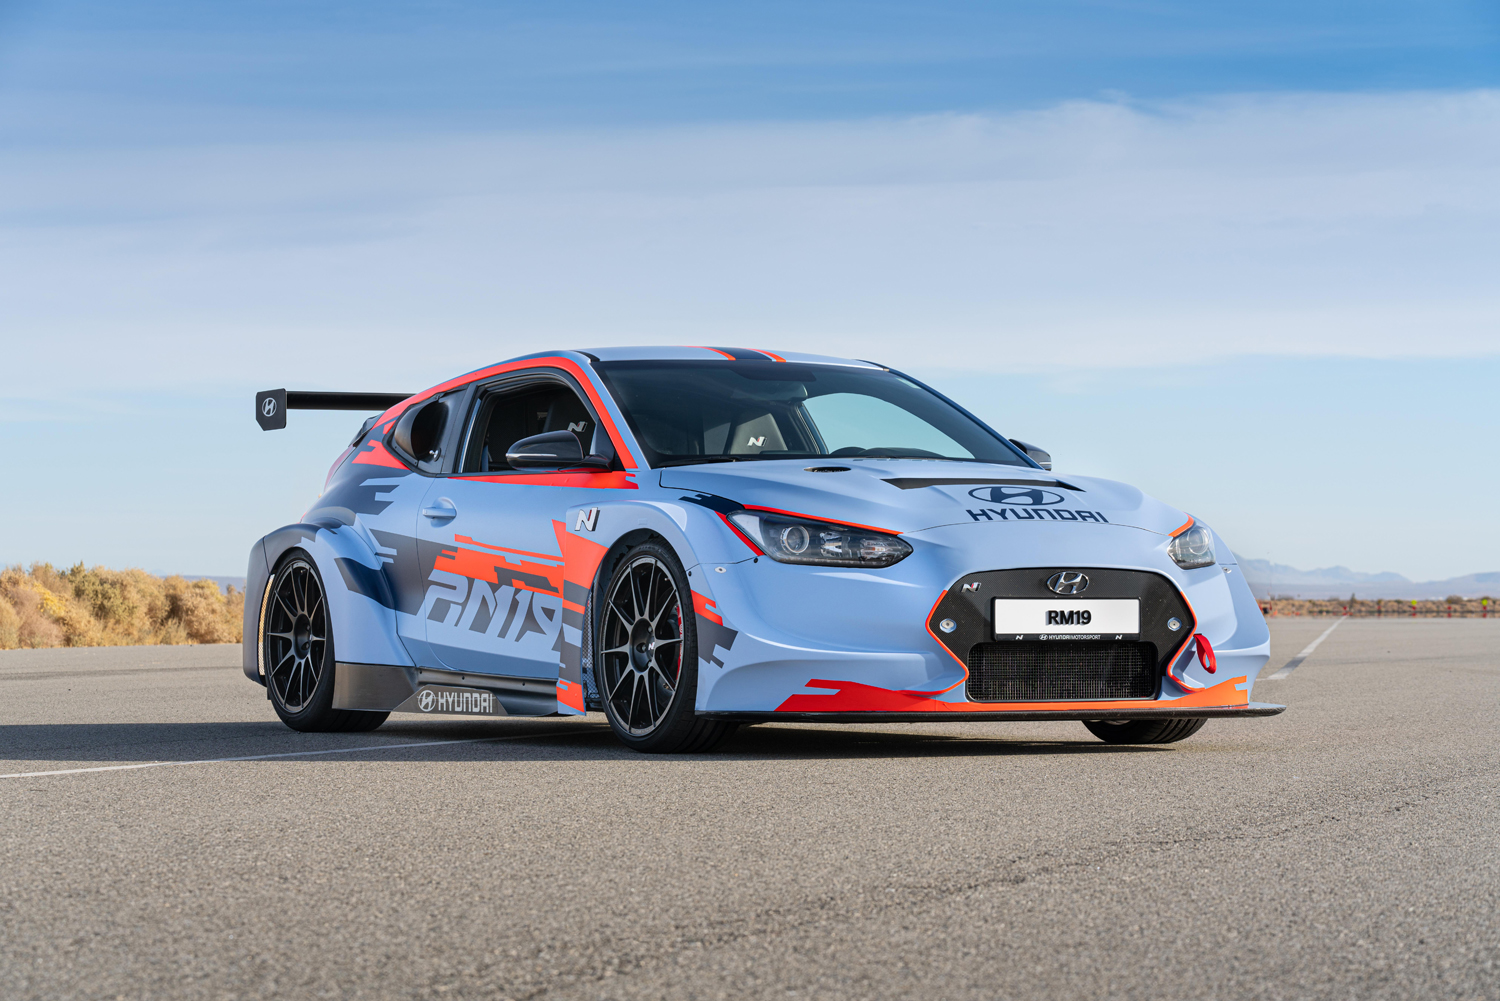 mid engined hyundai rm19 hot hatch unveiled at los angeles auto show 7